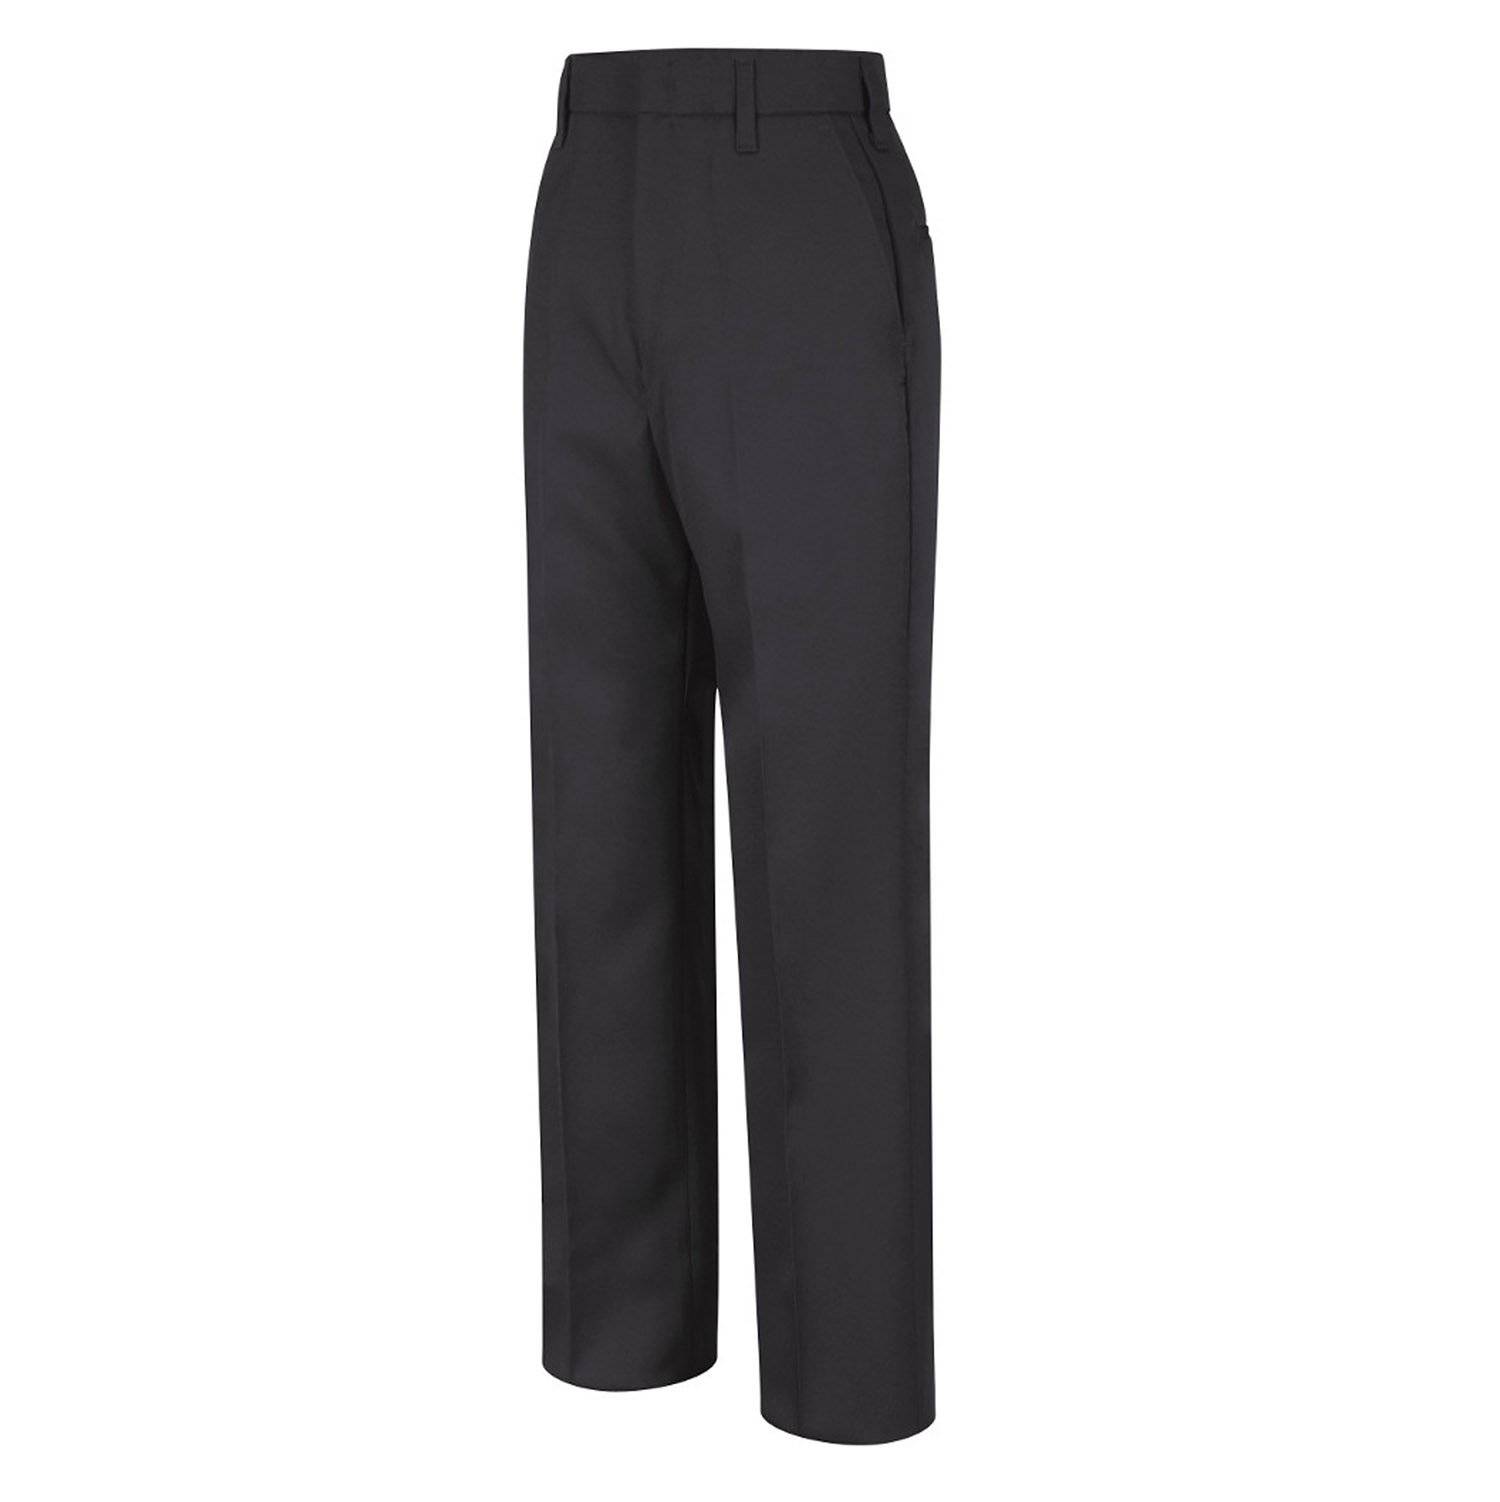 Horace Small Women's Sentinel Security Pants